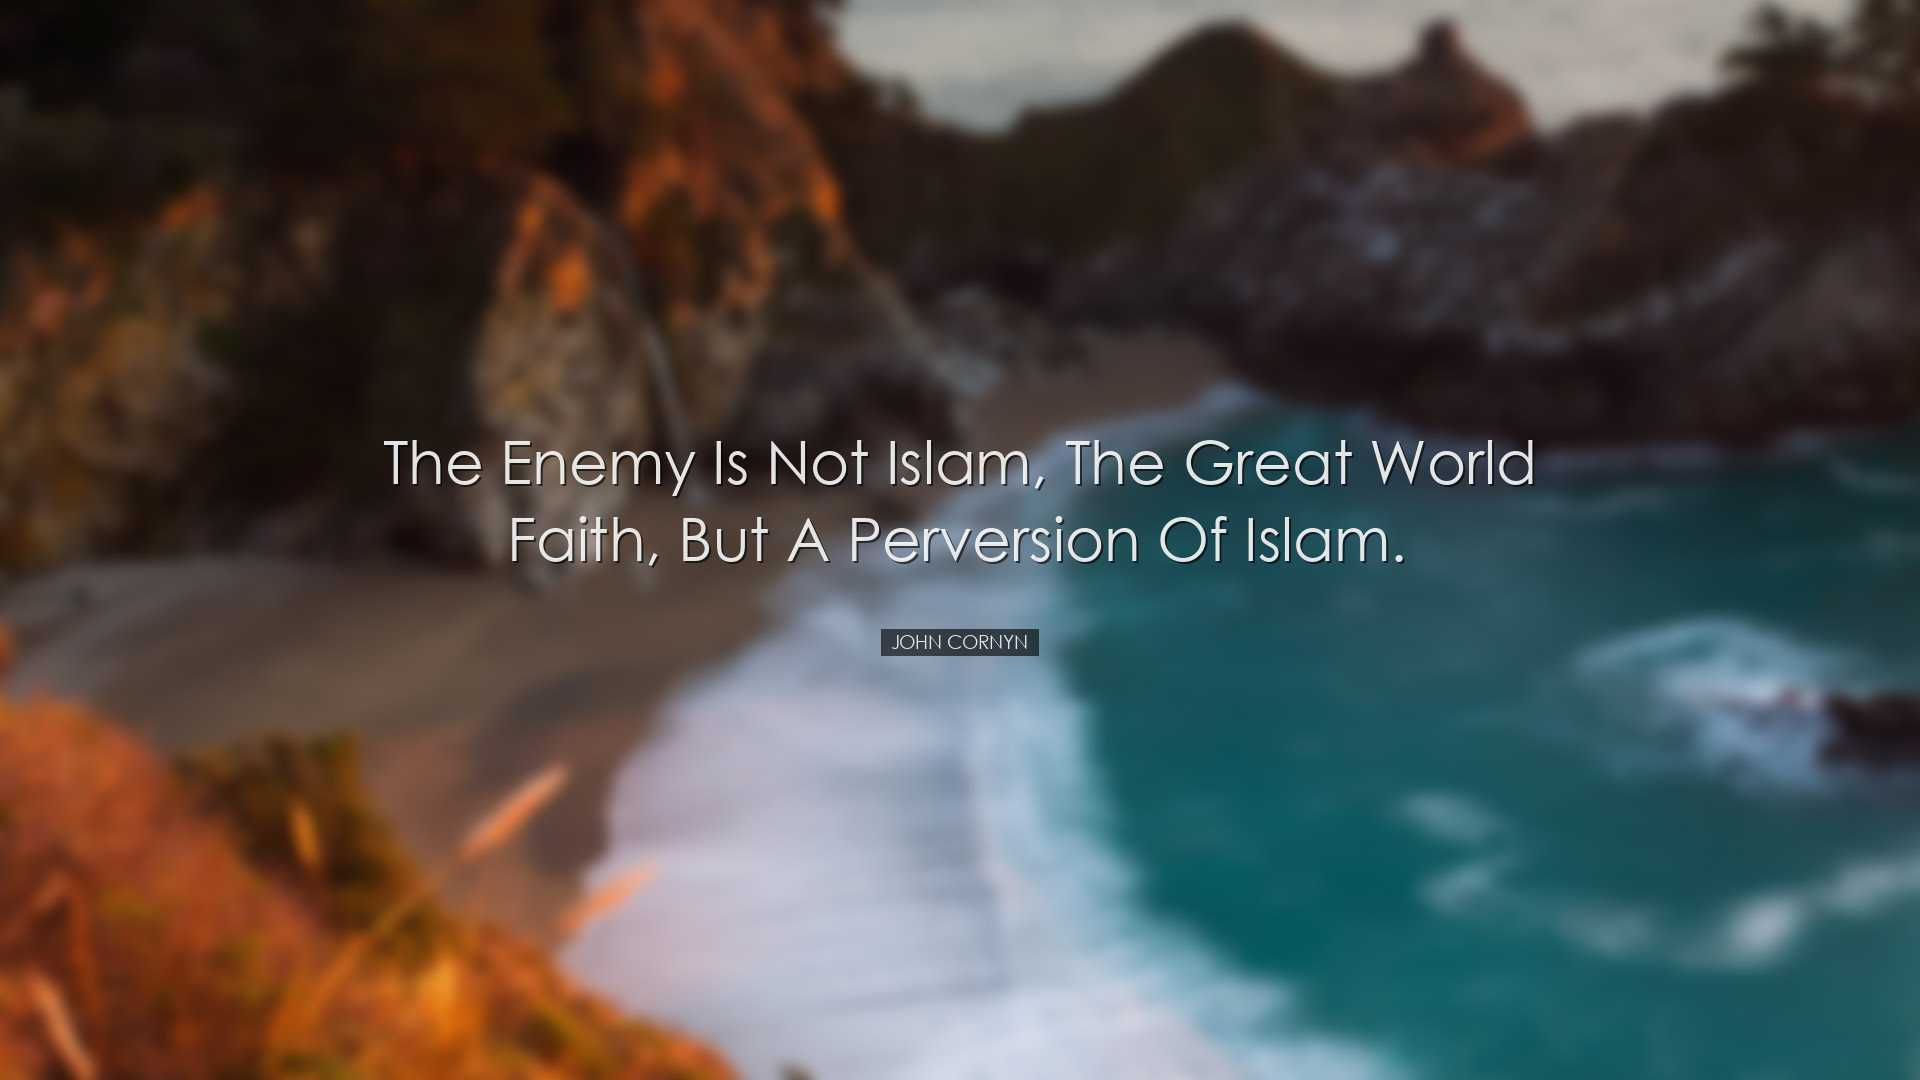 The enemy is not Islam, the great world faith, but a perversion of